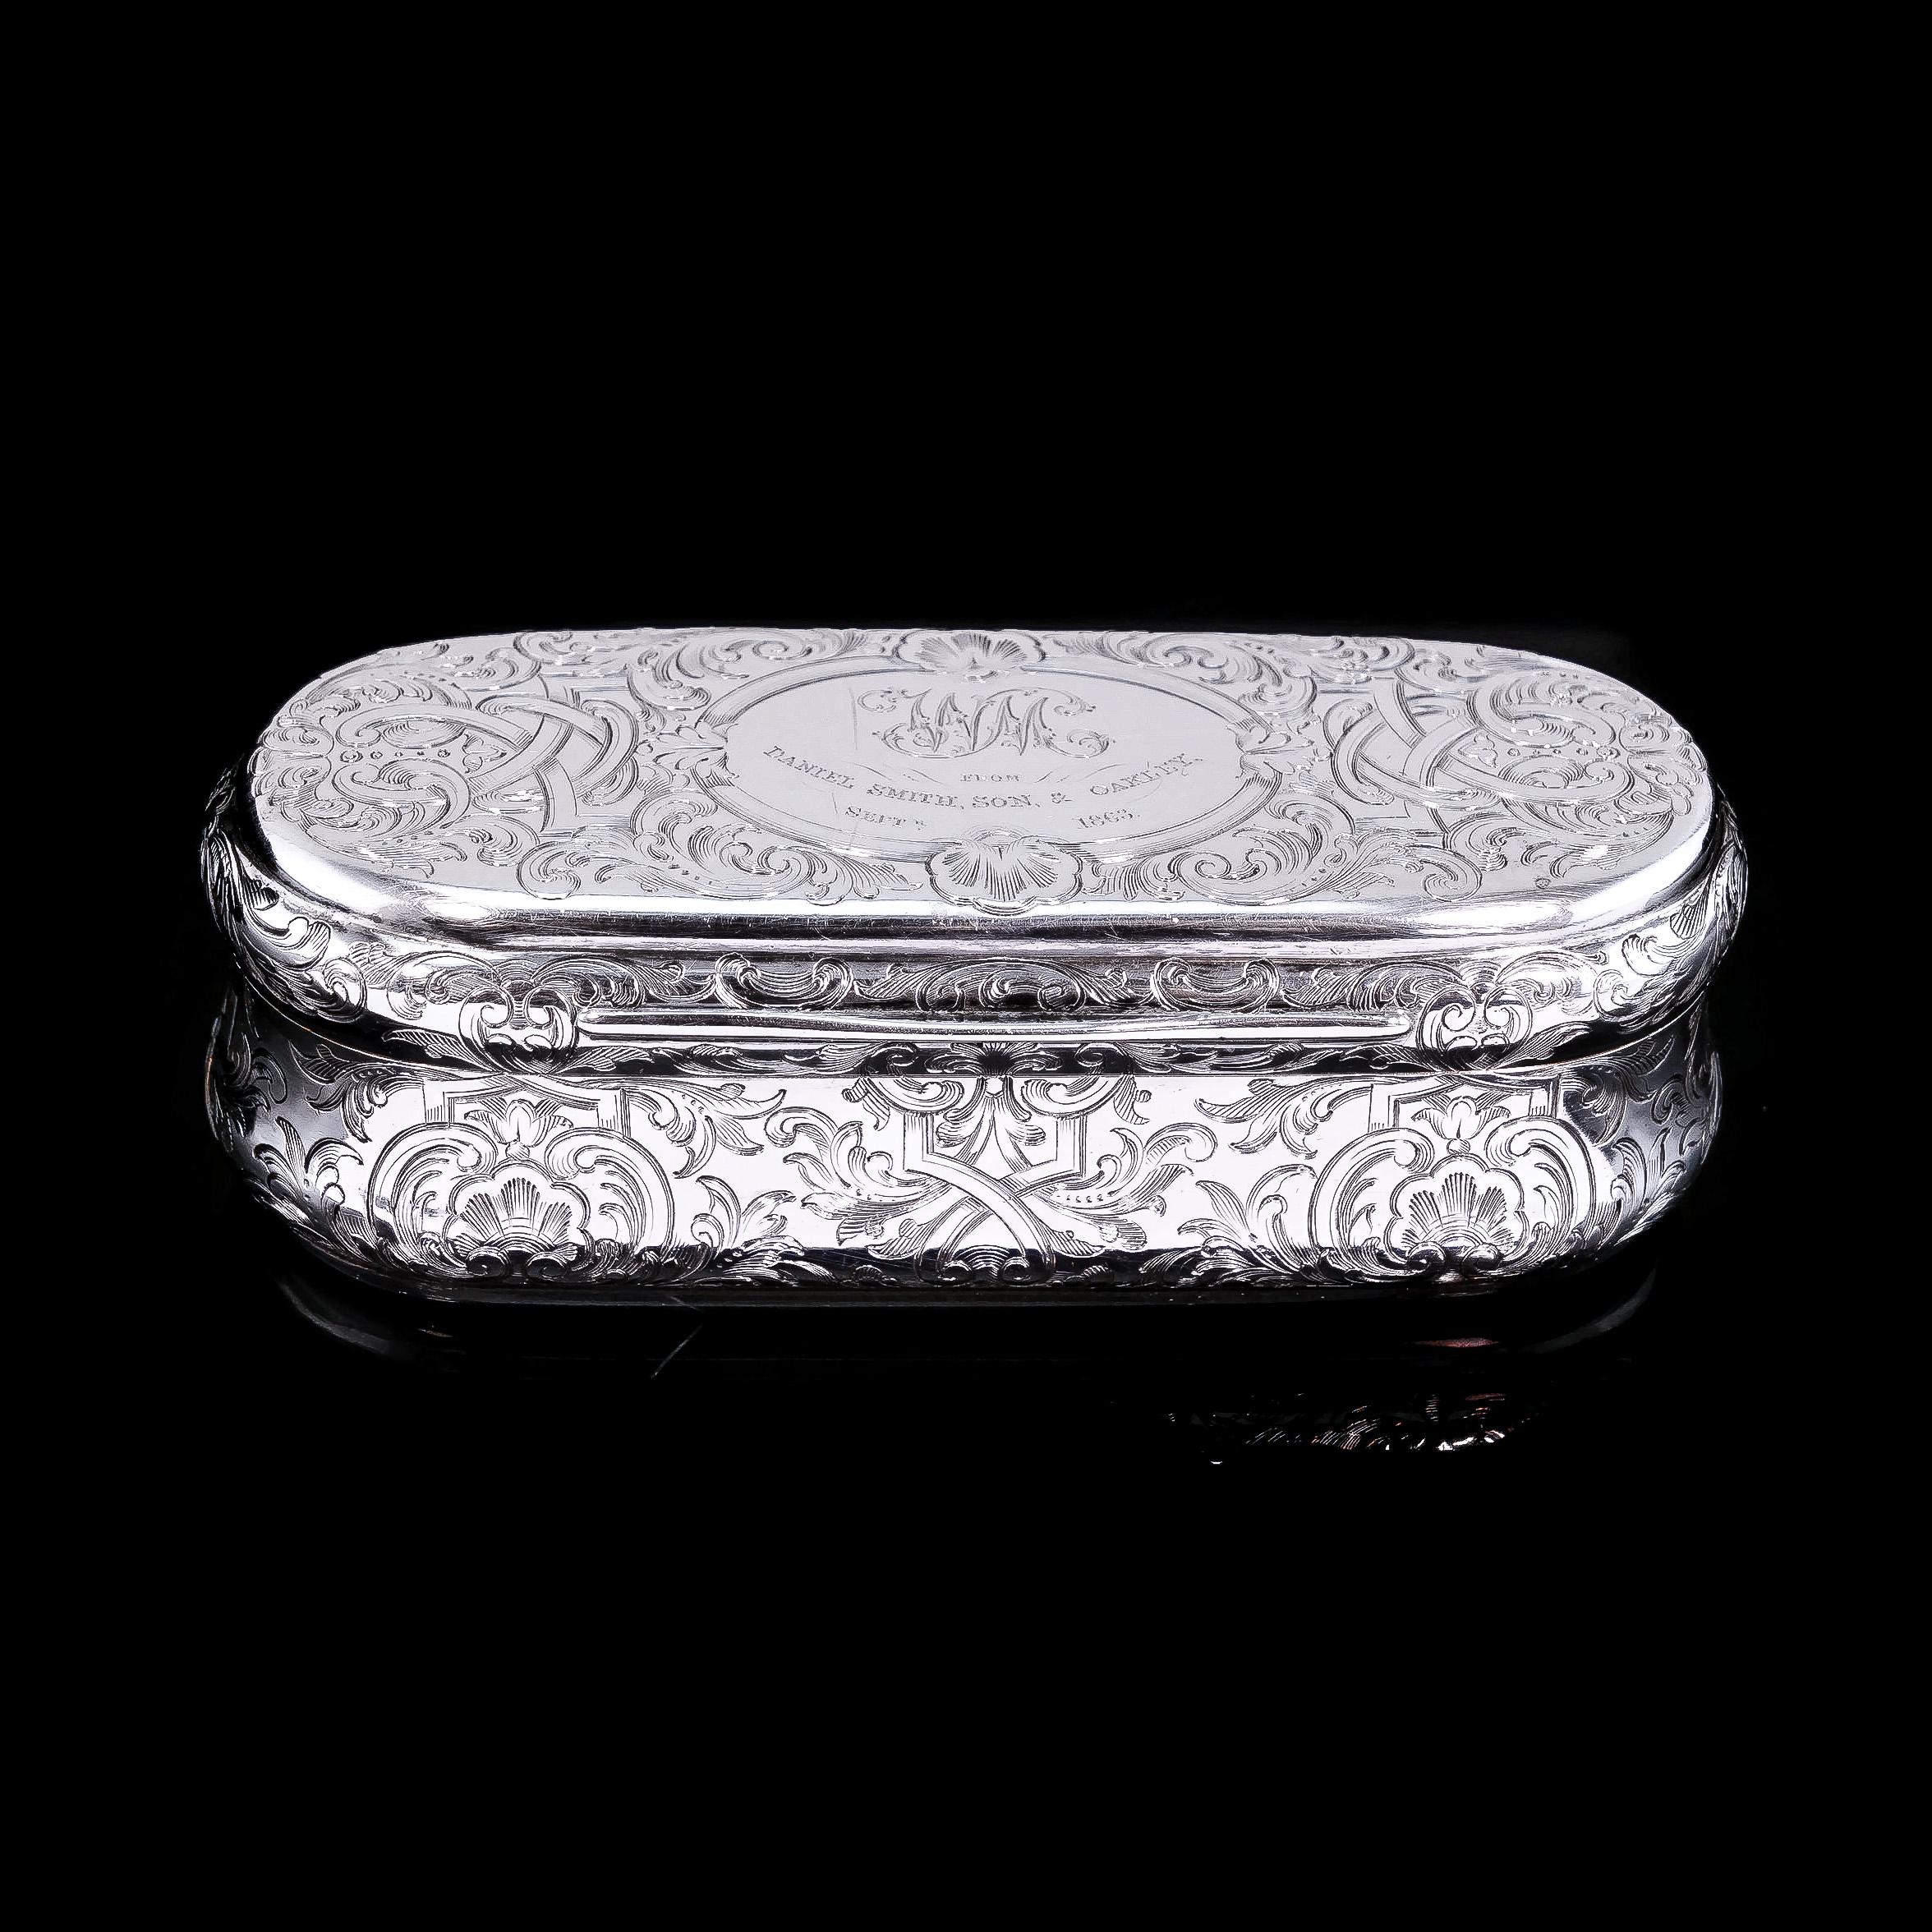 Antique Silver Snuff Box Oblong Shape - Charles Rawlings & William Summers 1849 For Sale 1